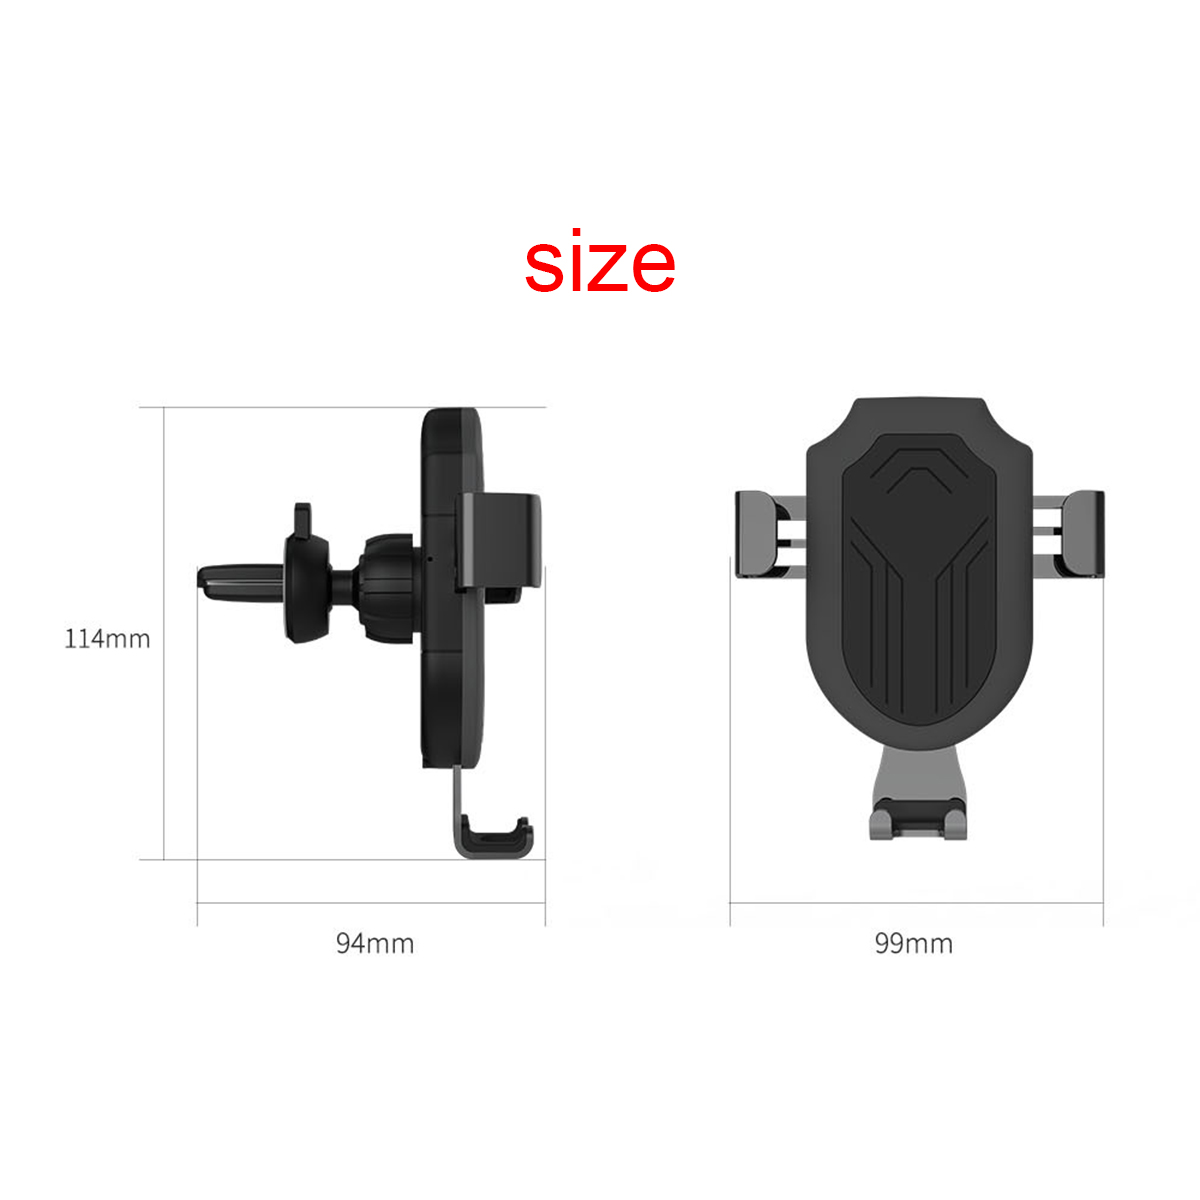 5W-Qi-Wirelesss-Charge-Gravity-Linkage-Automatical-Lock-Car-Stand-Air-Vent-Holder-for-iPhone-Mobile--1425872-5